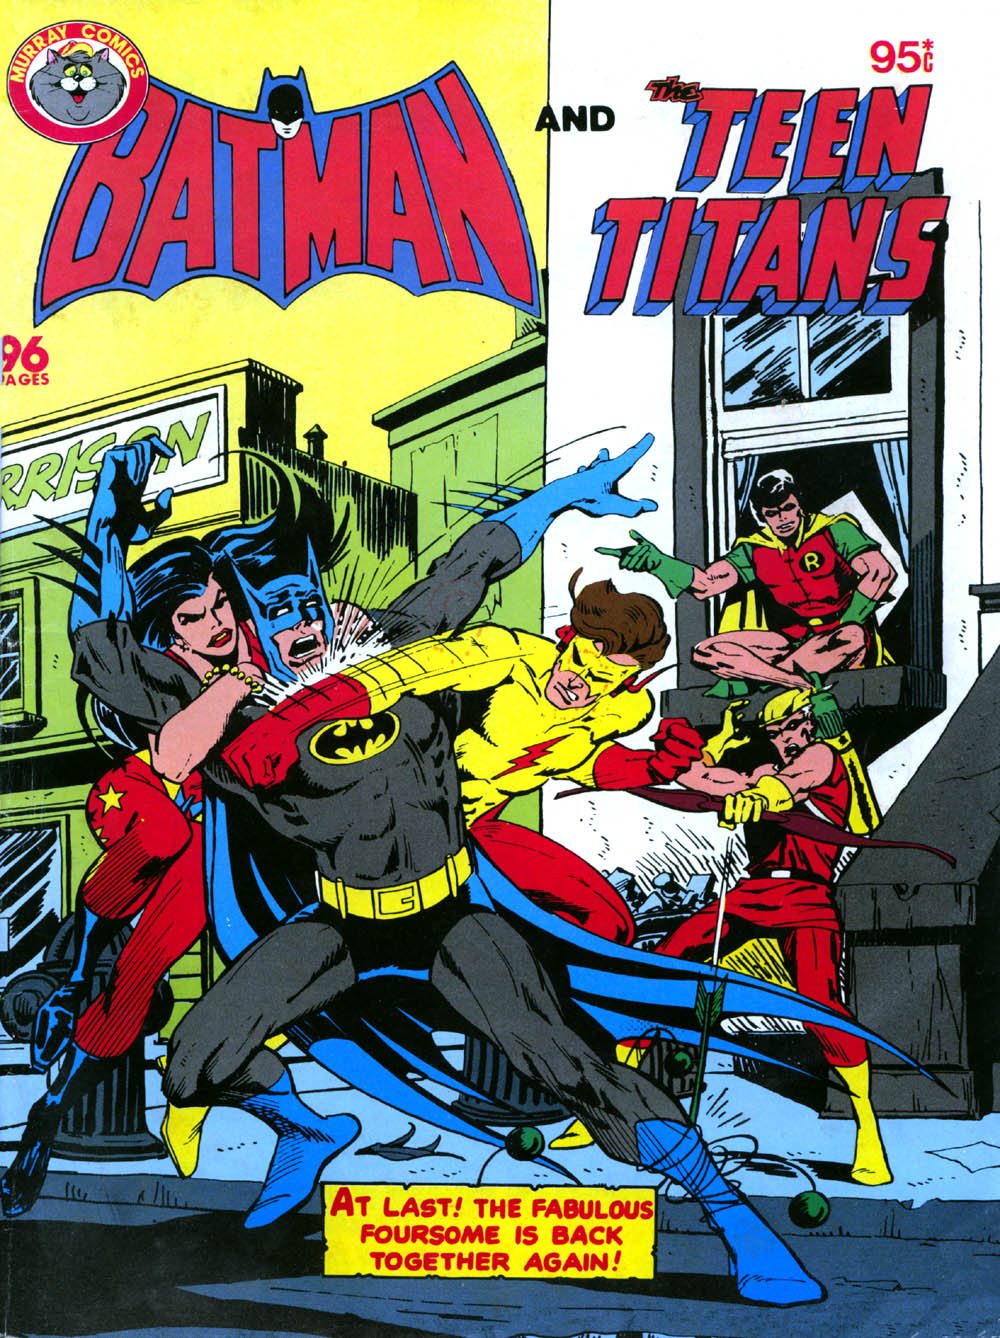 Brave and the Bold Comic #149 - Batman and Teen Titans - 1979 - Great  Condition.